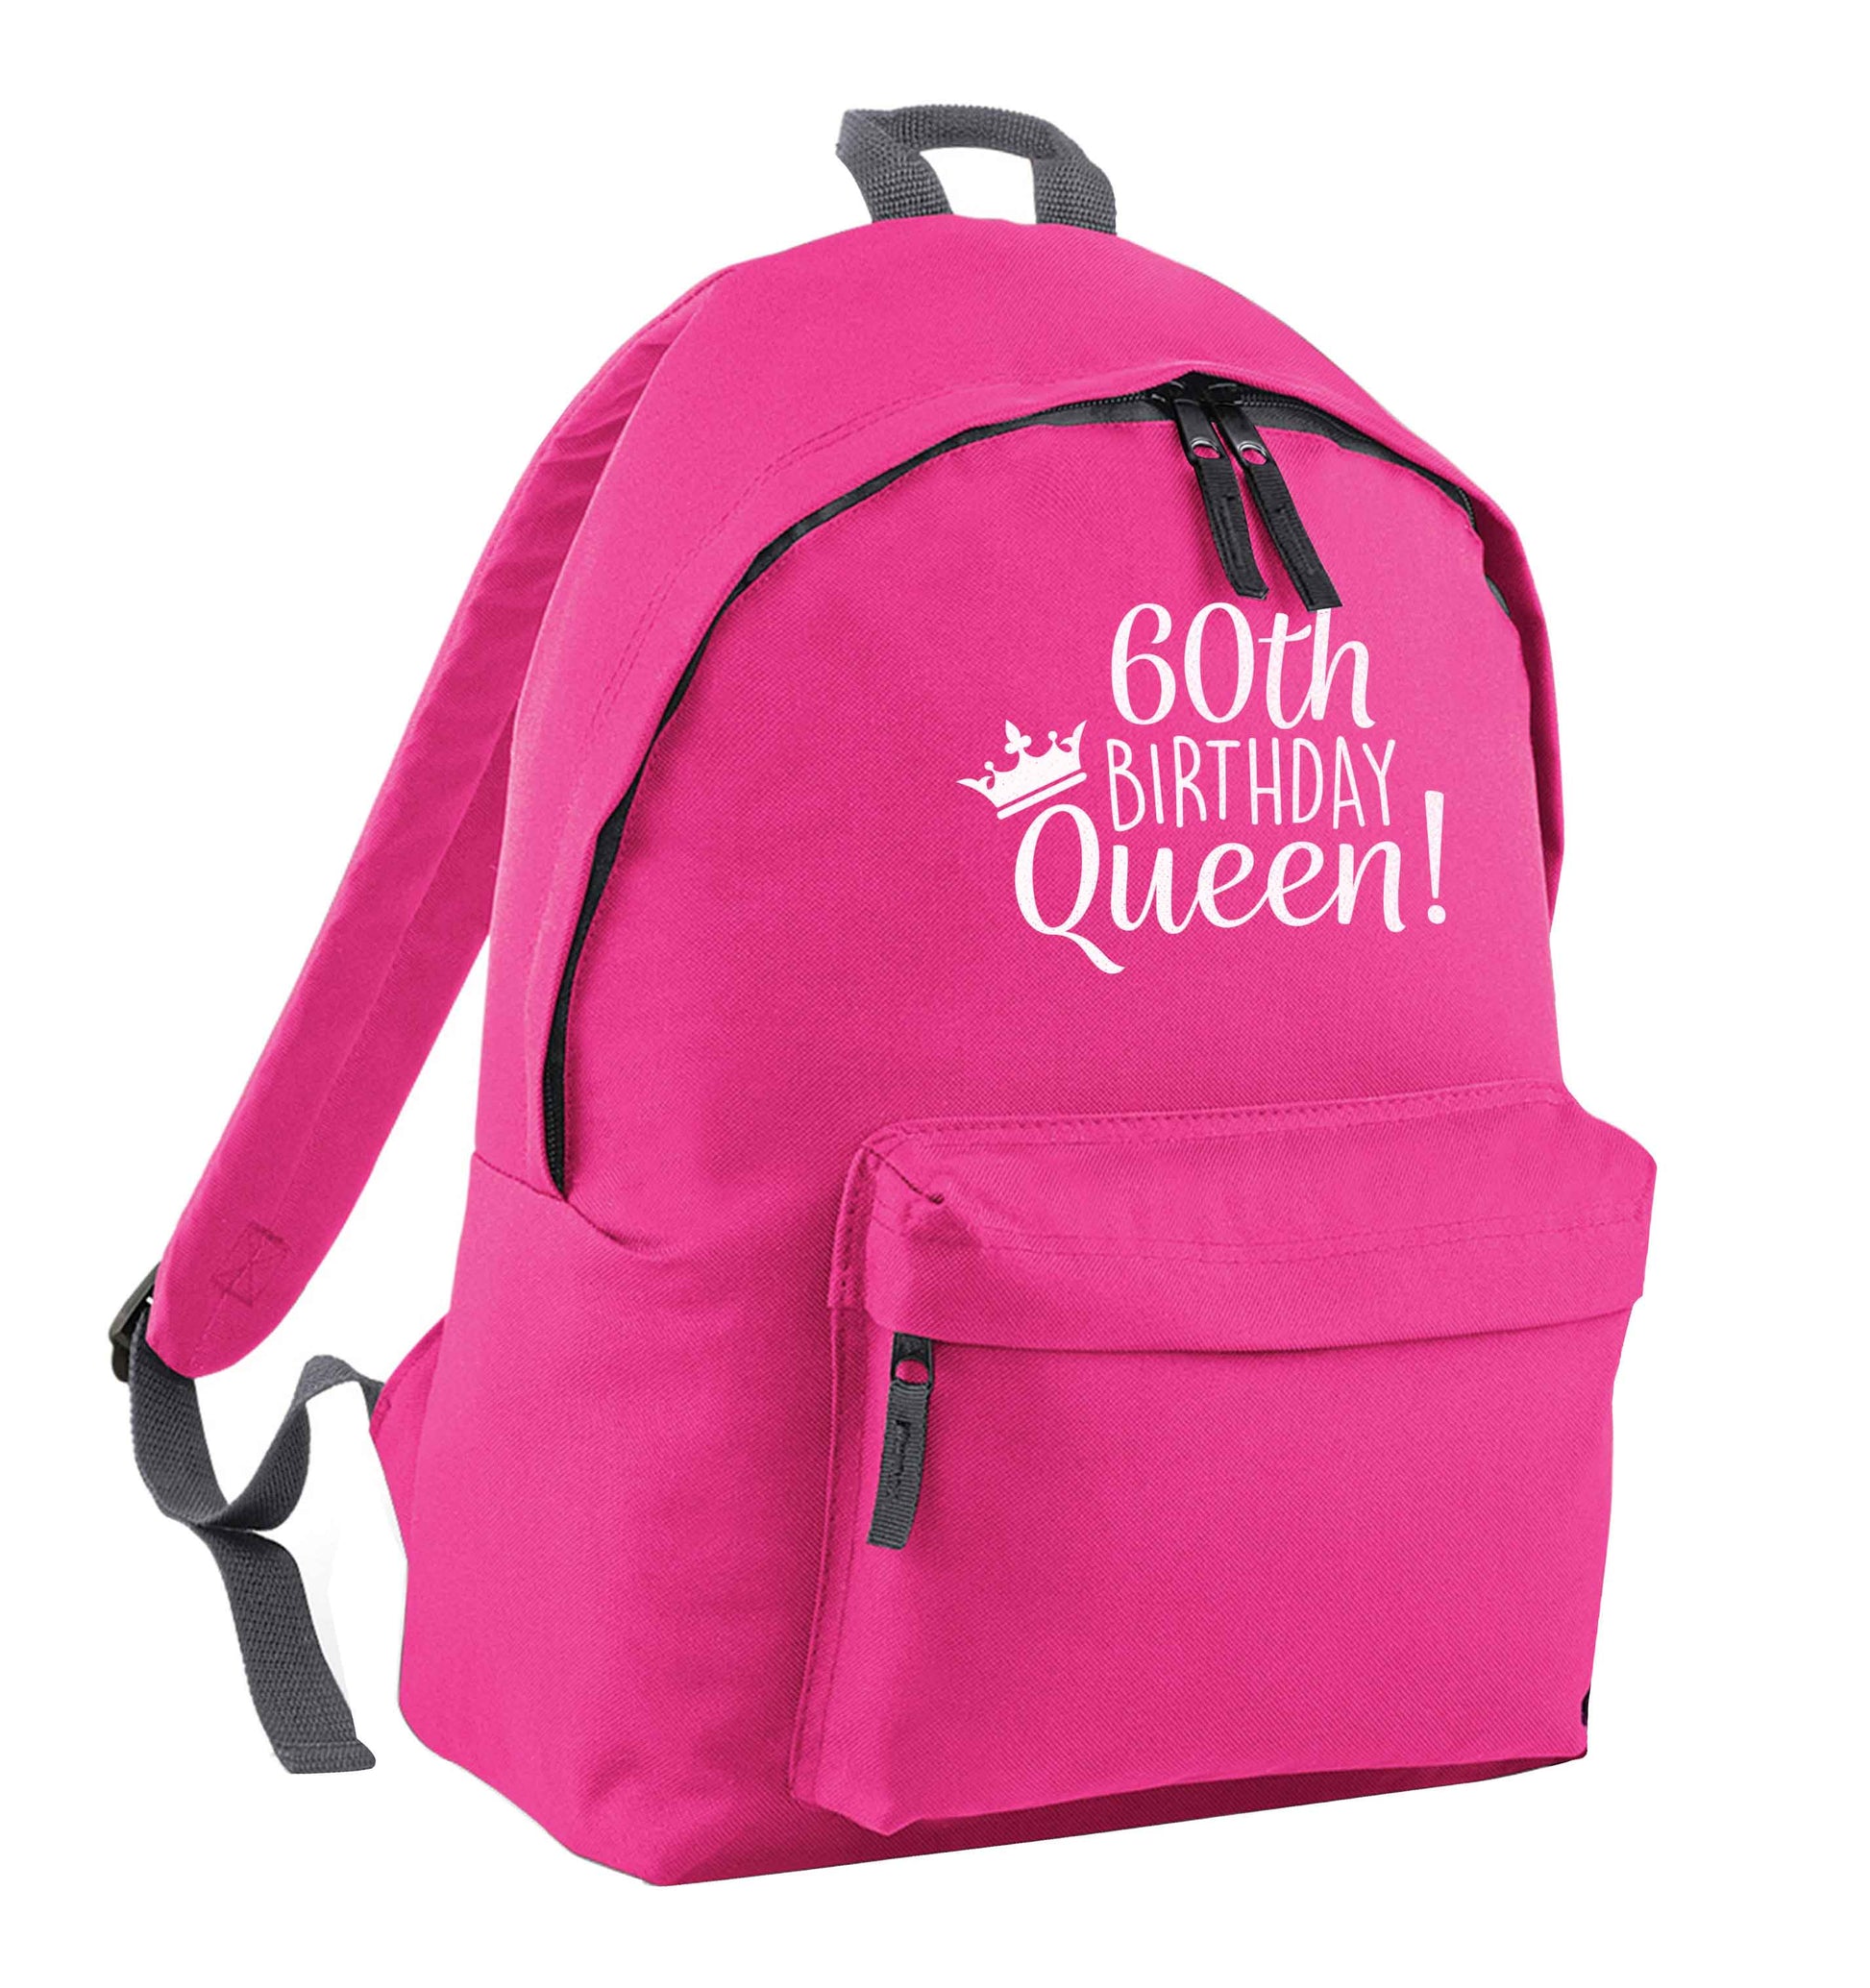 60th birthday Queen pink adults backpack